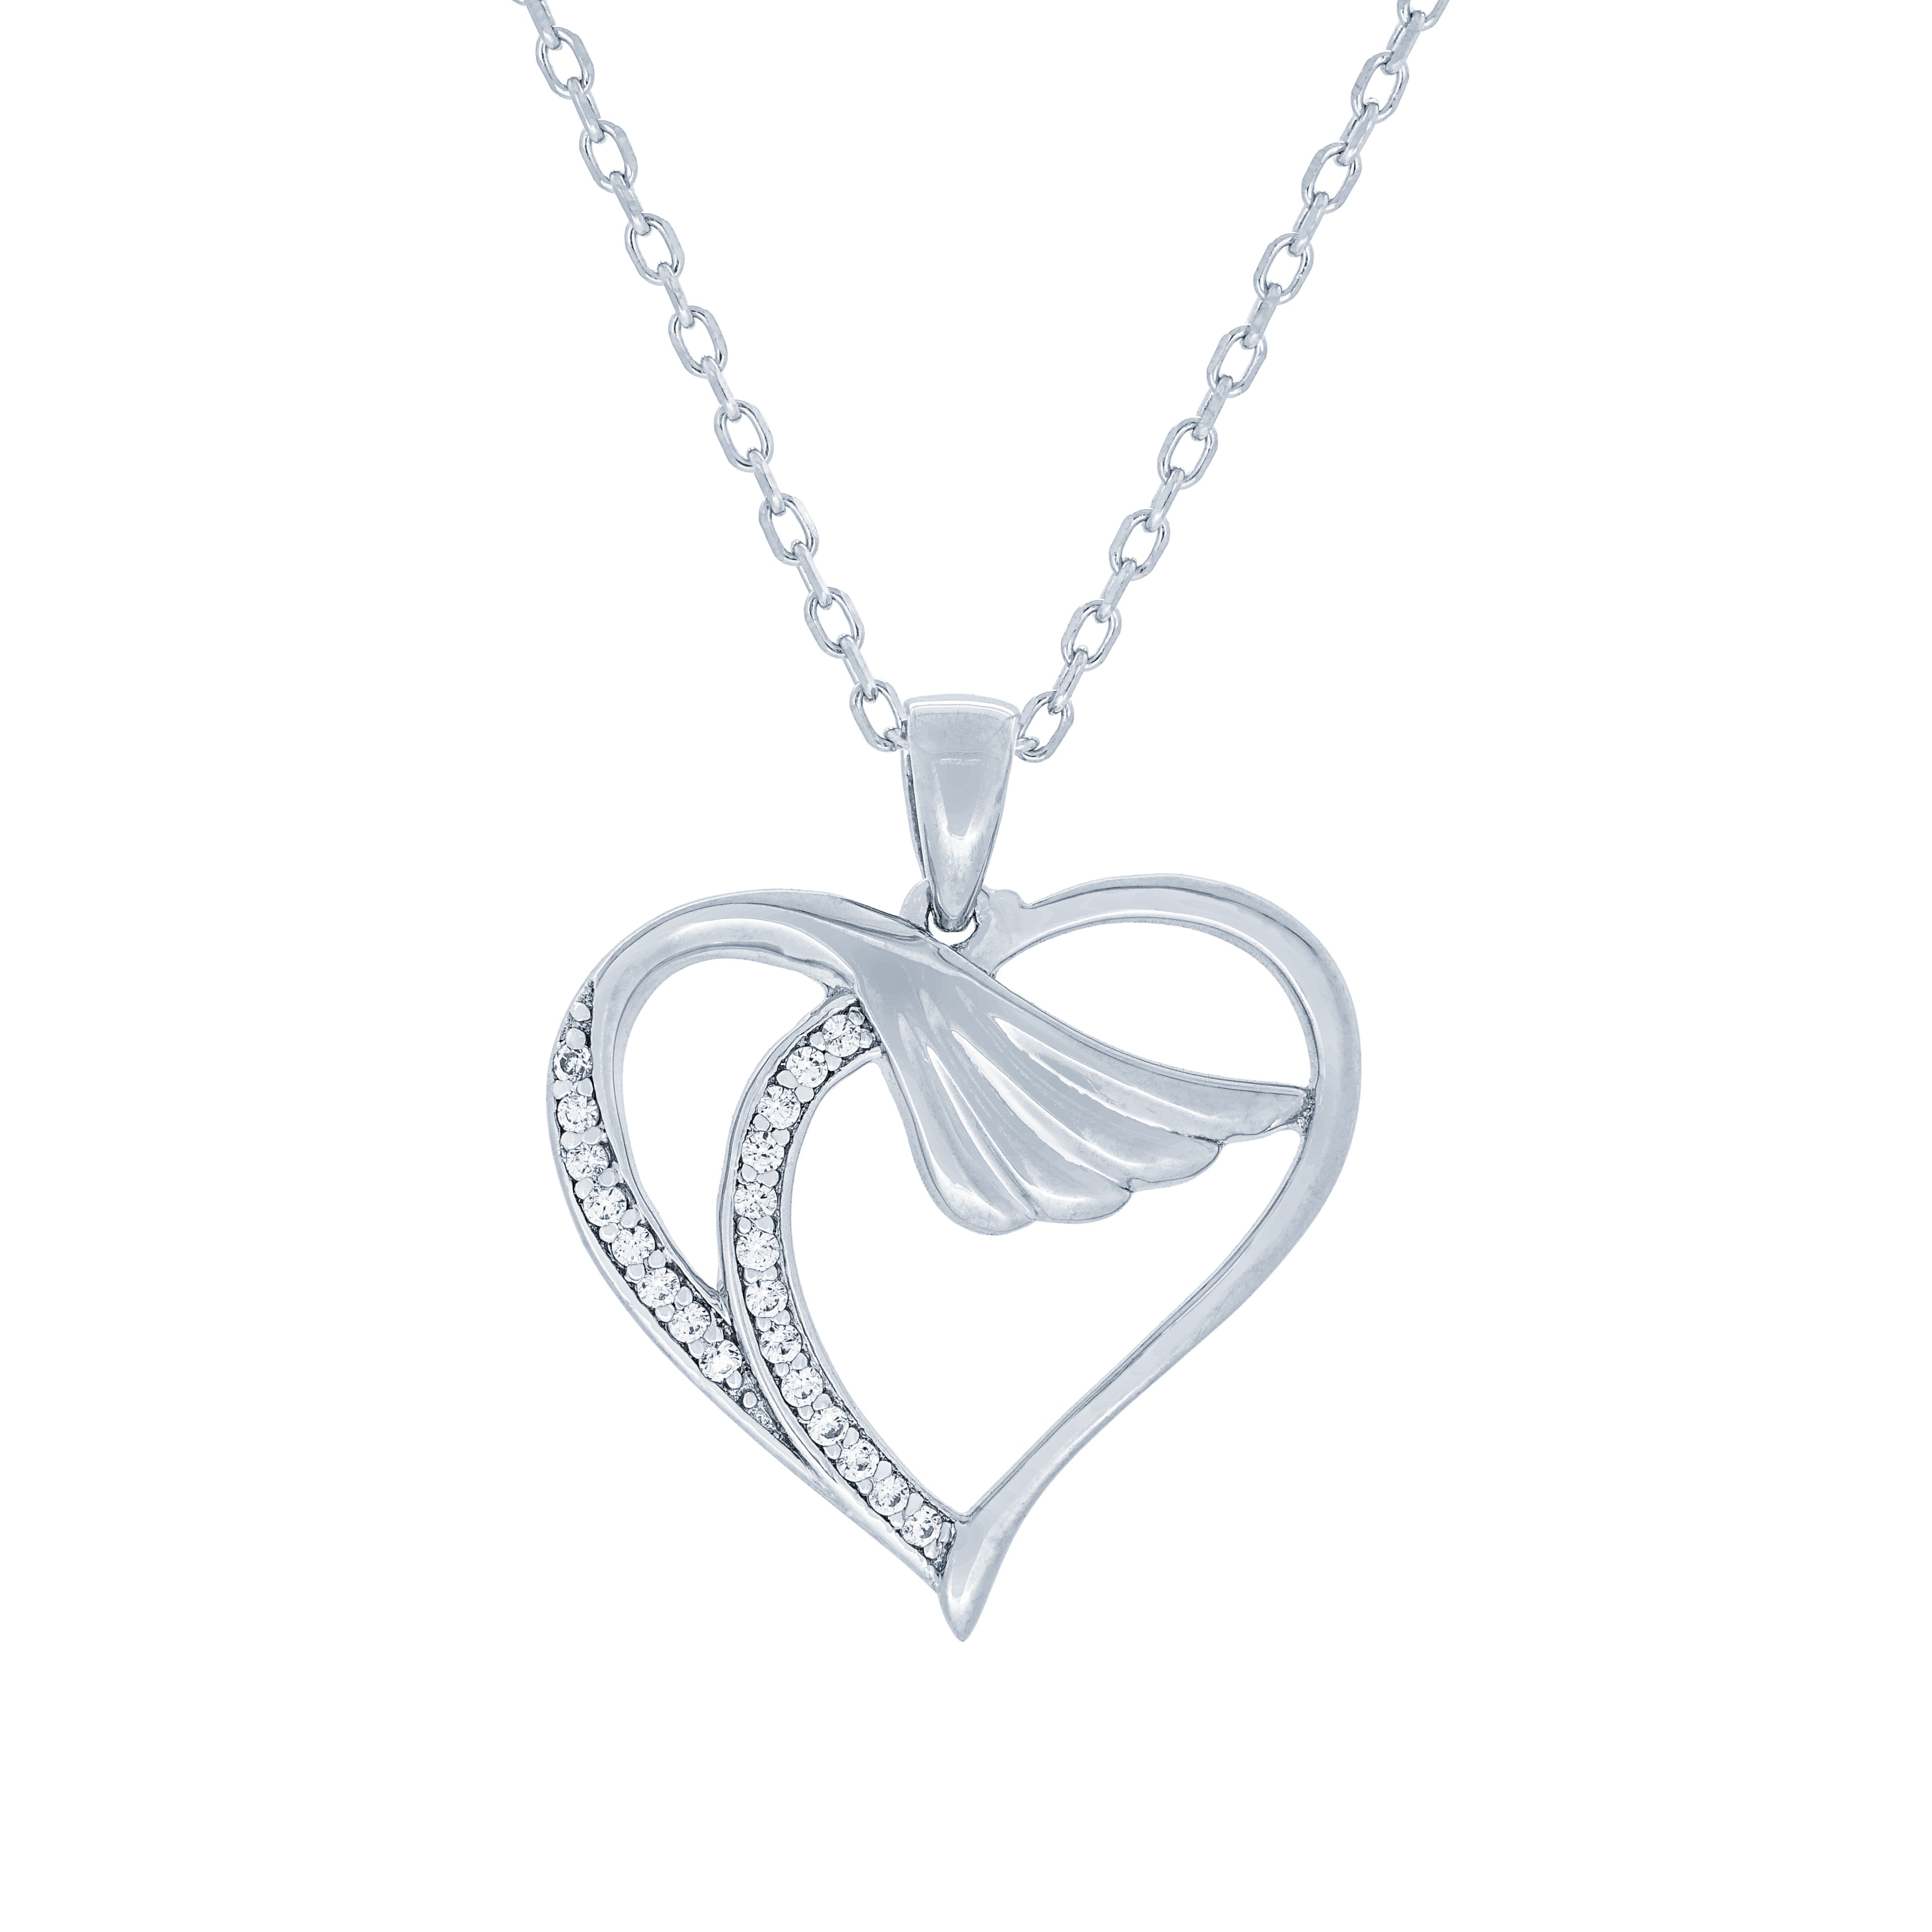 (100155) White Cubic Zirconia Heart Wing Pendant Necklace In Sterling Silver